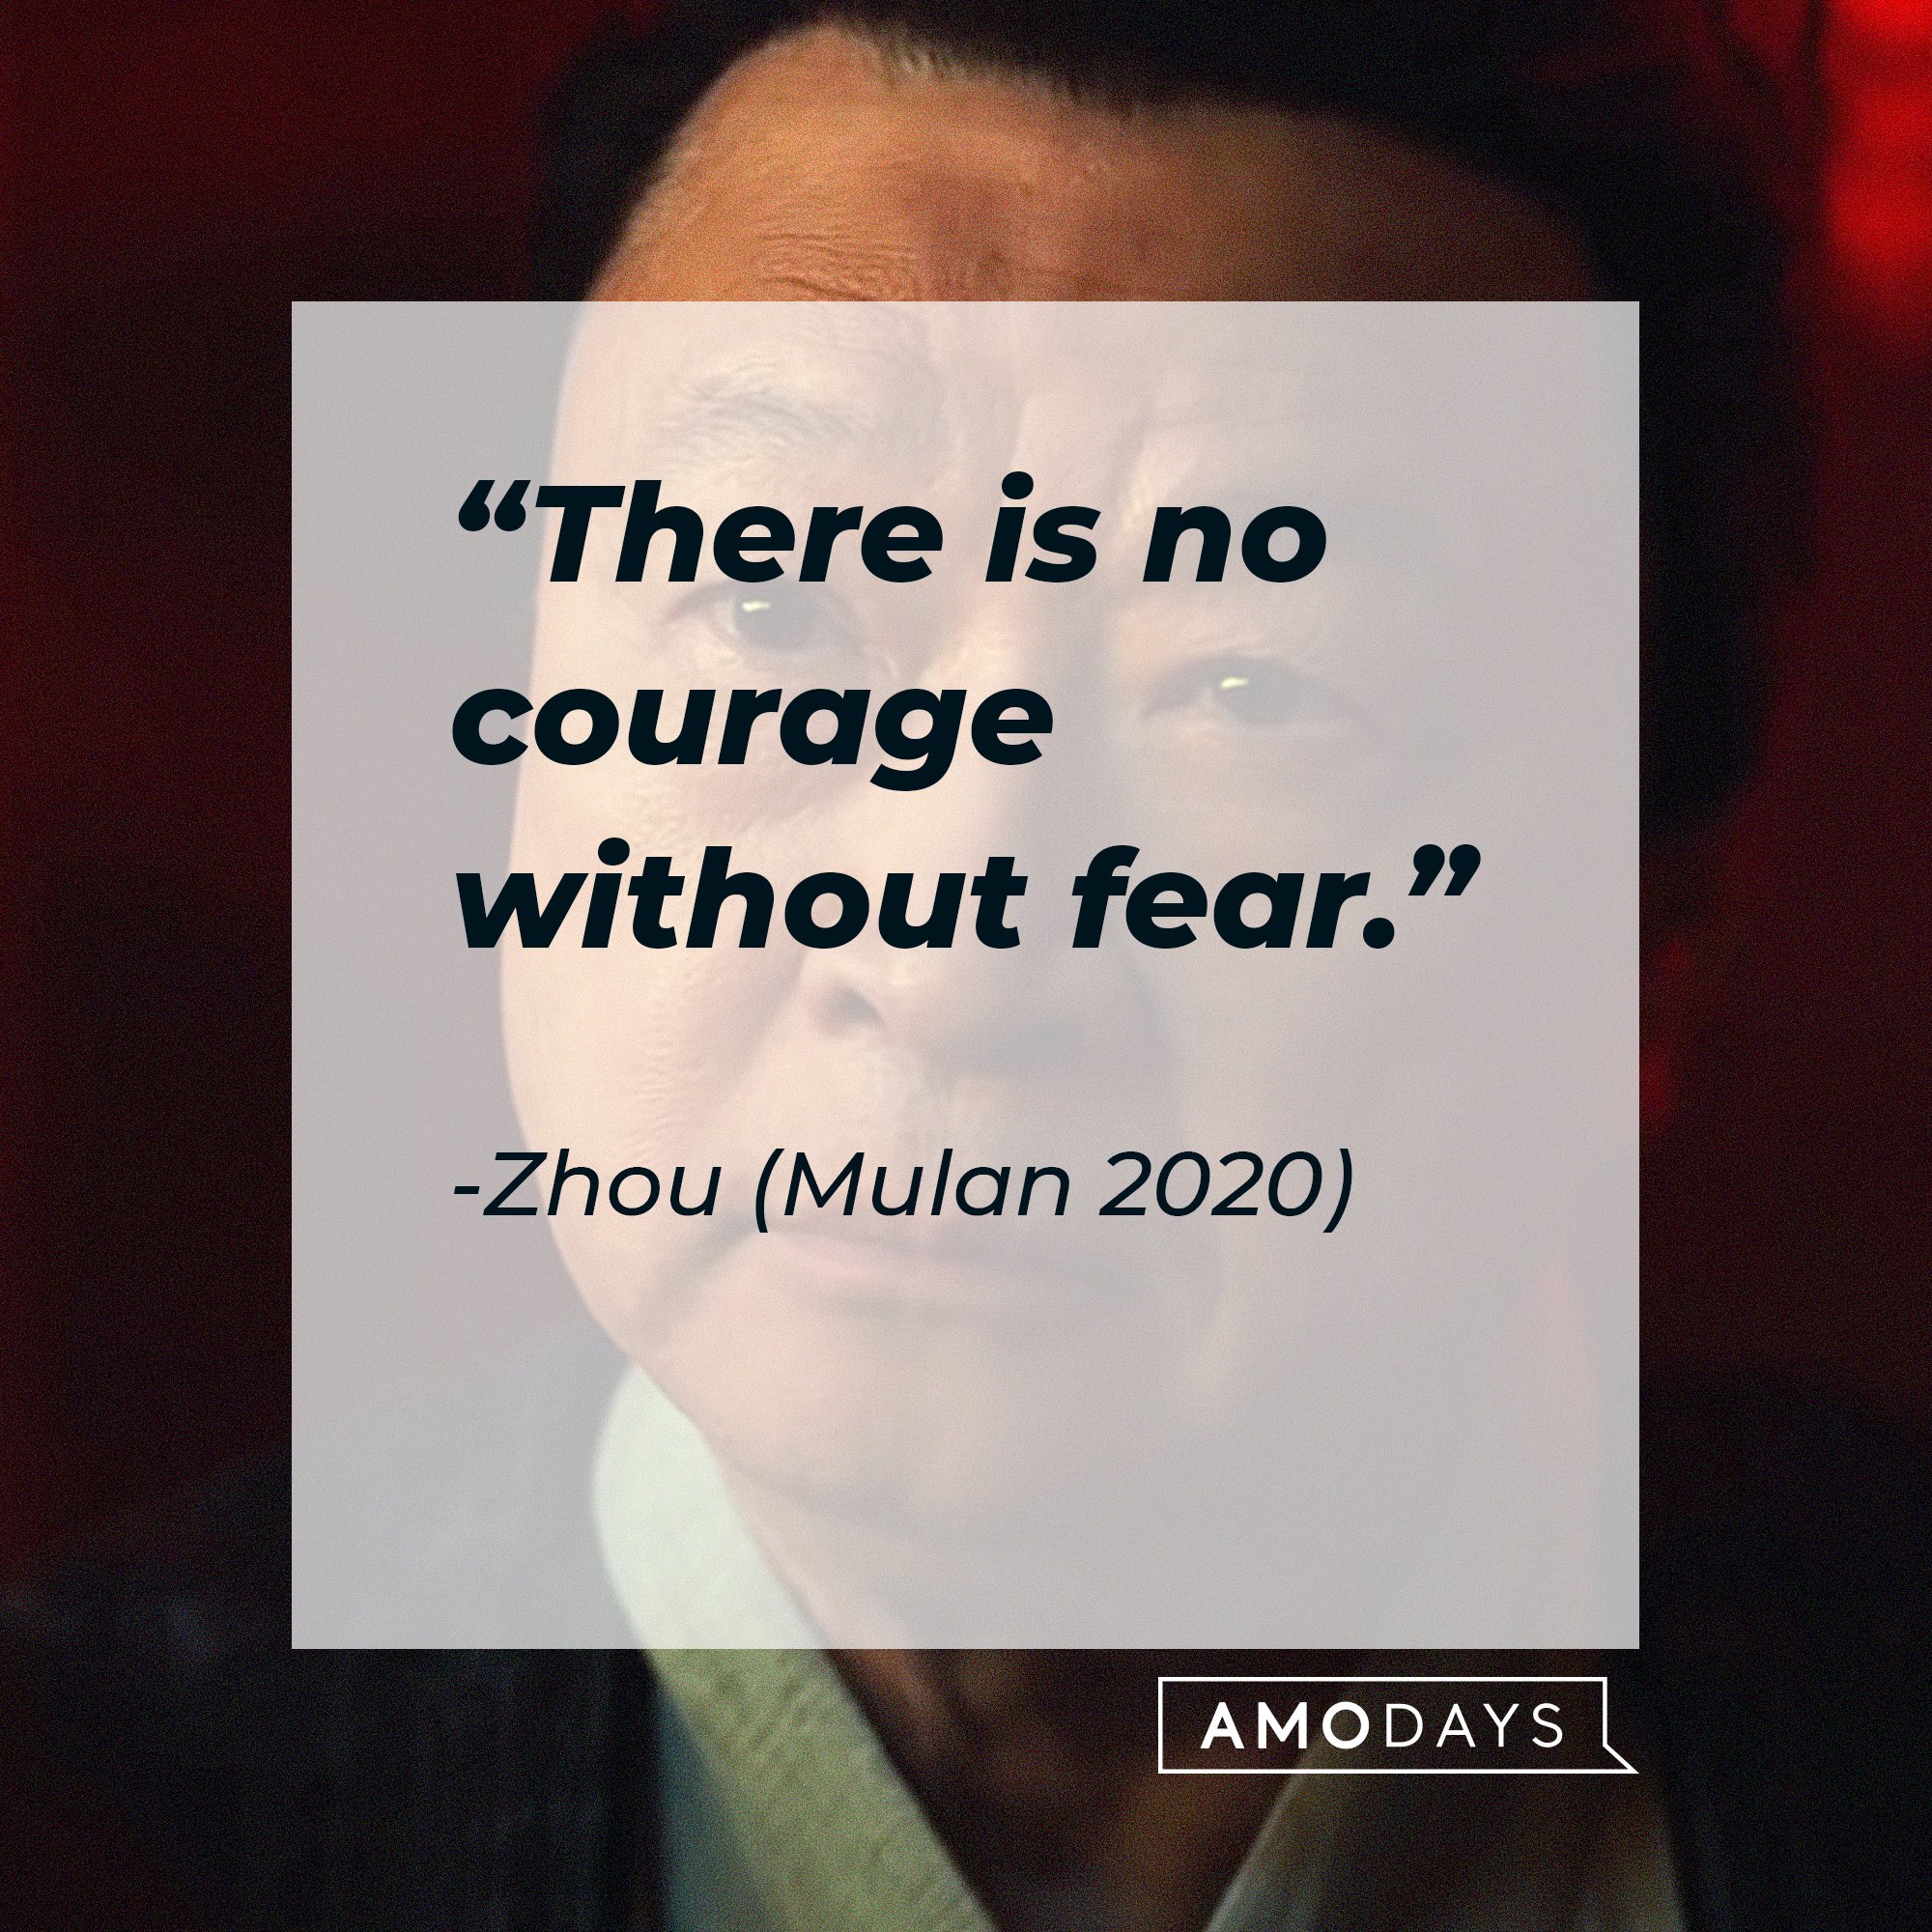 Zhou’s quote: “There is no courage without fear.” | Image: AmoDays